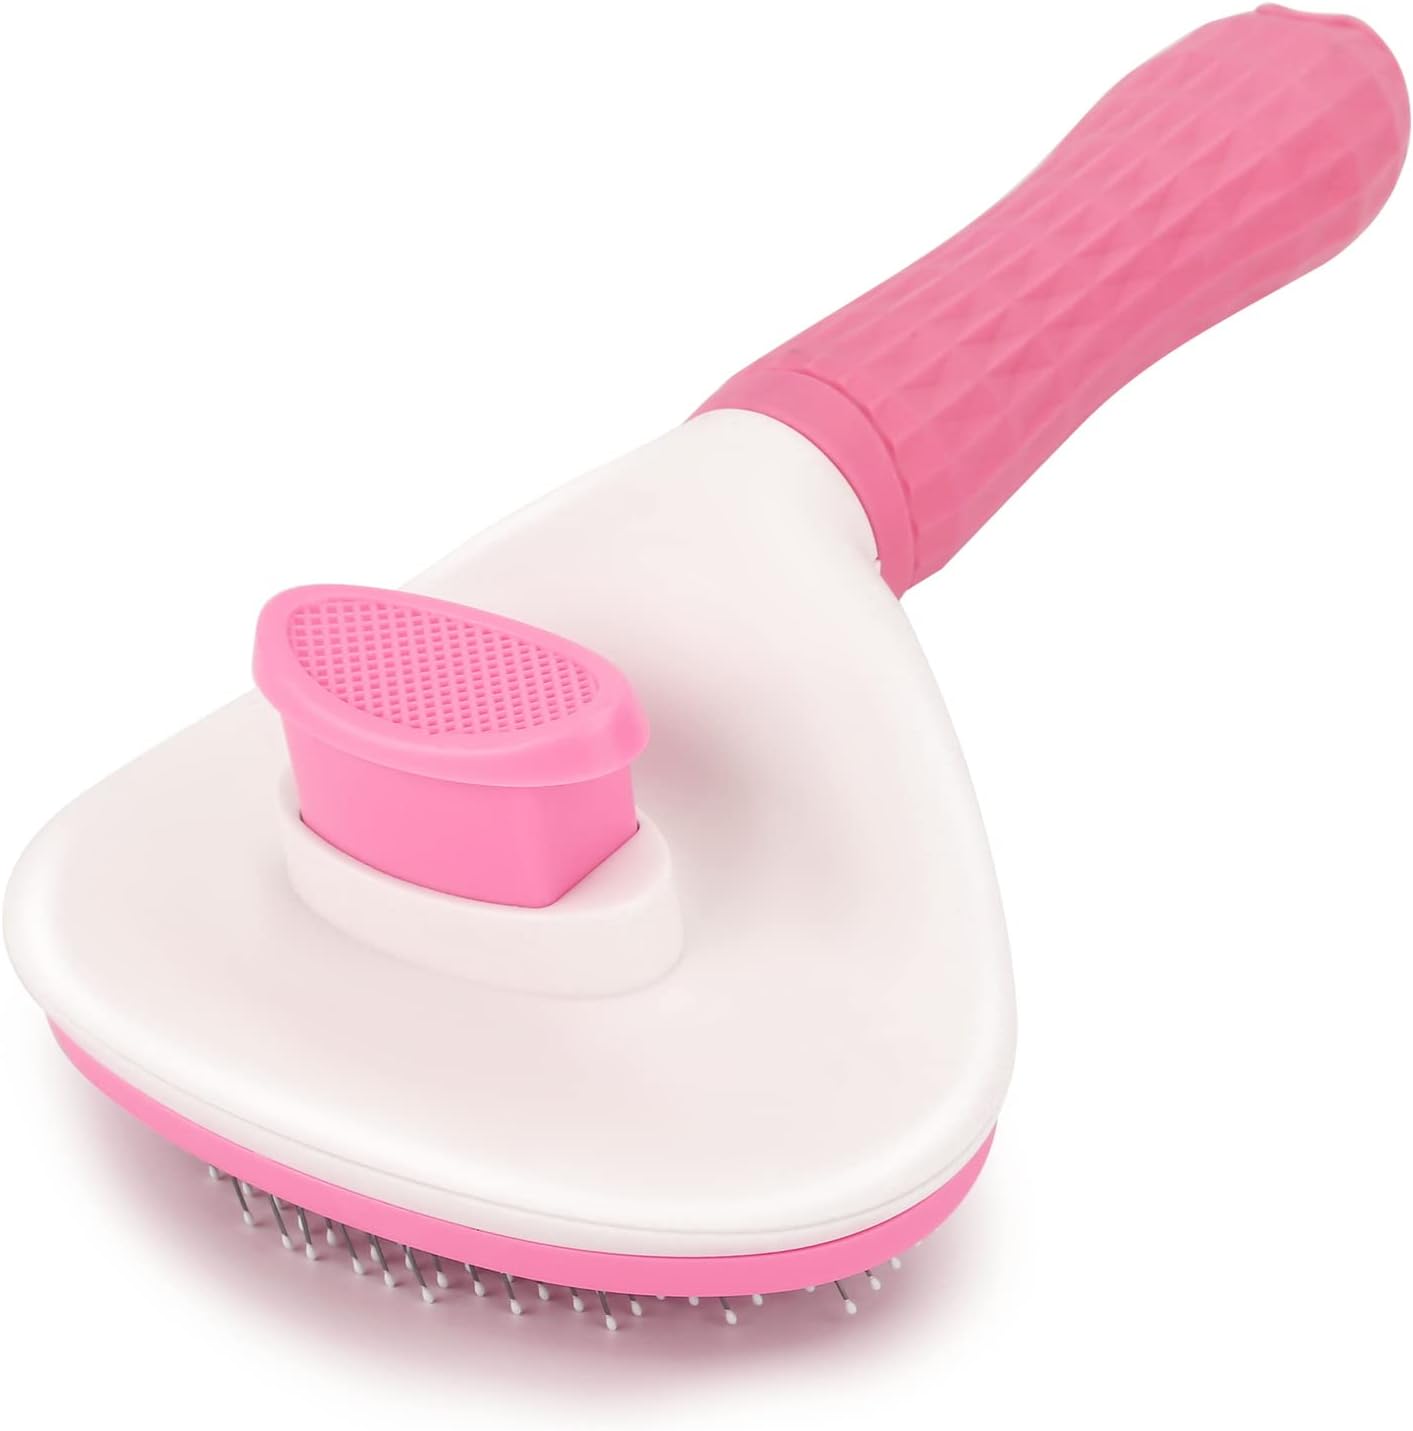 Exclusive Promo - Depets Self Cleaning Slicker Brush, Dog Cat Bunny Pet Grooming Shedding Brush